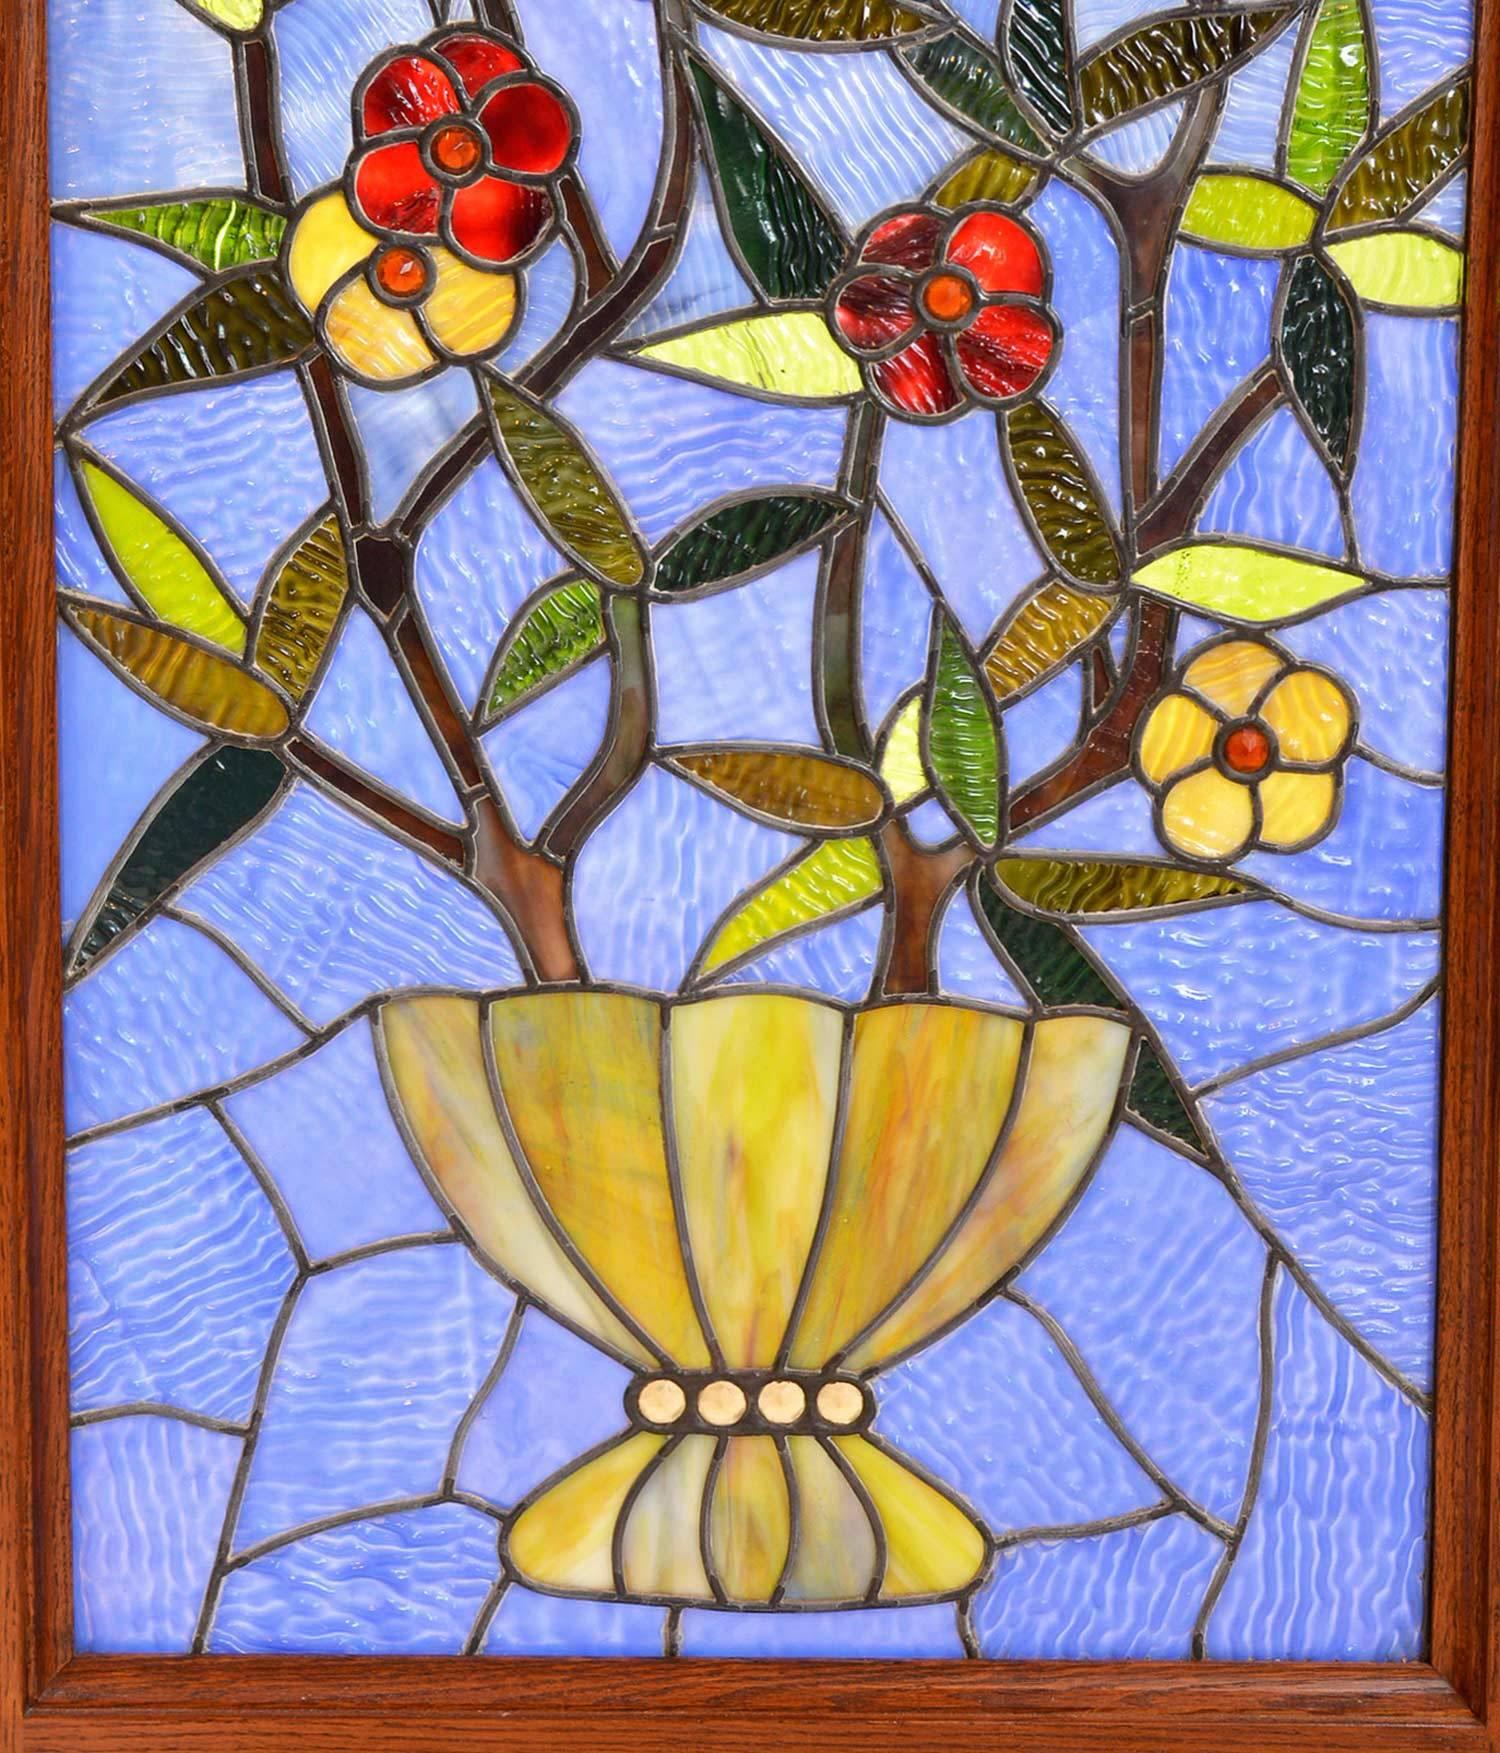 Beautiful stained glass vase and stained glass floral bouquet window from the Aesthetic movement. Great play of colors with rich textured glass background. In excellent condition, free of cracks or breaks.